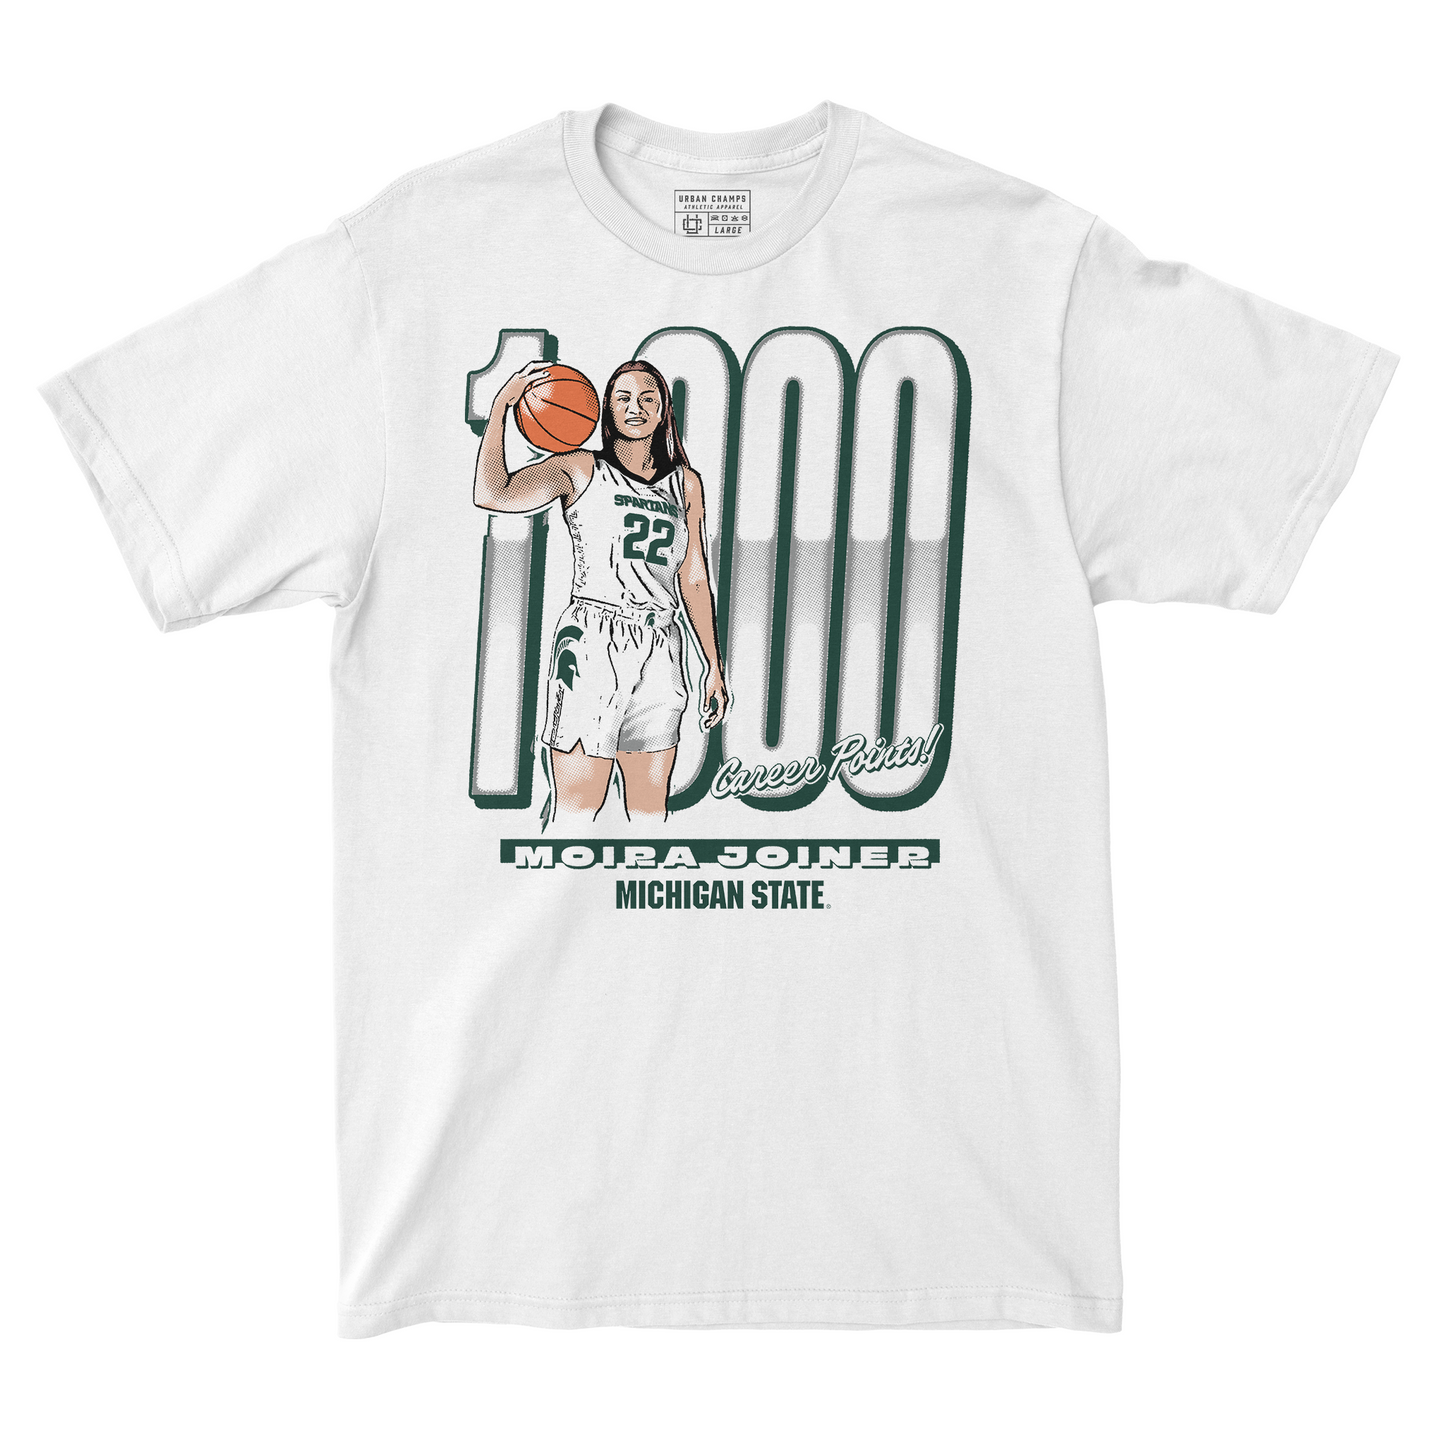 EXCLUSIVE RELEASE - Moira Joiner 1,000 Pts Tee